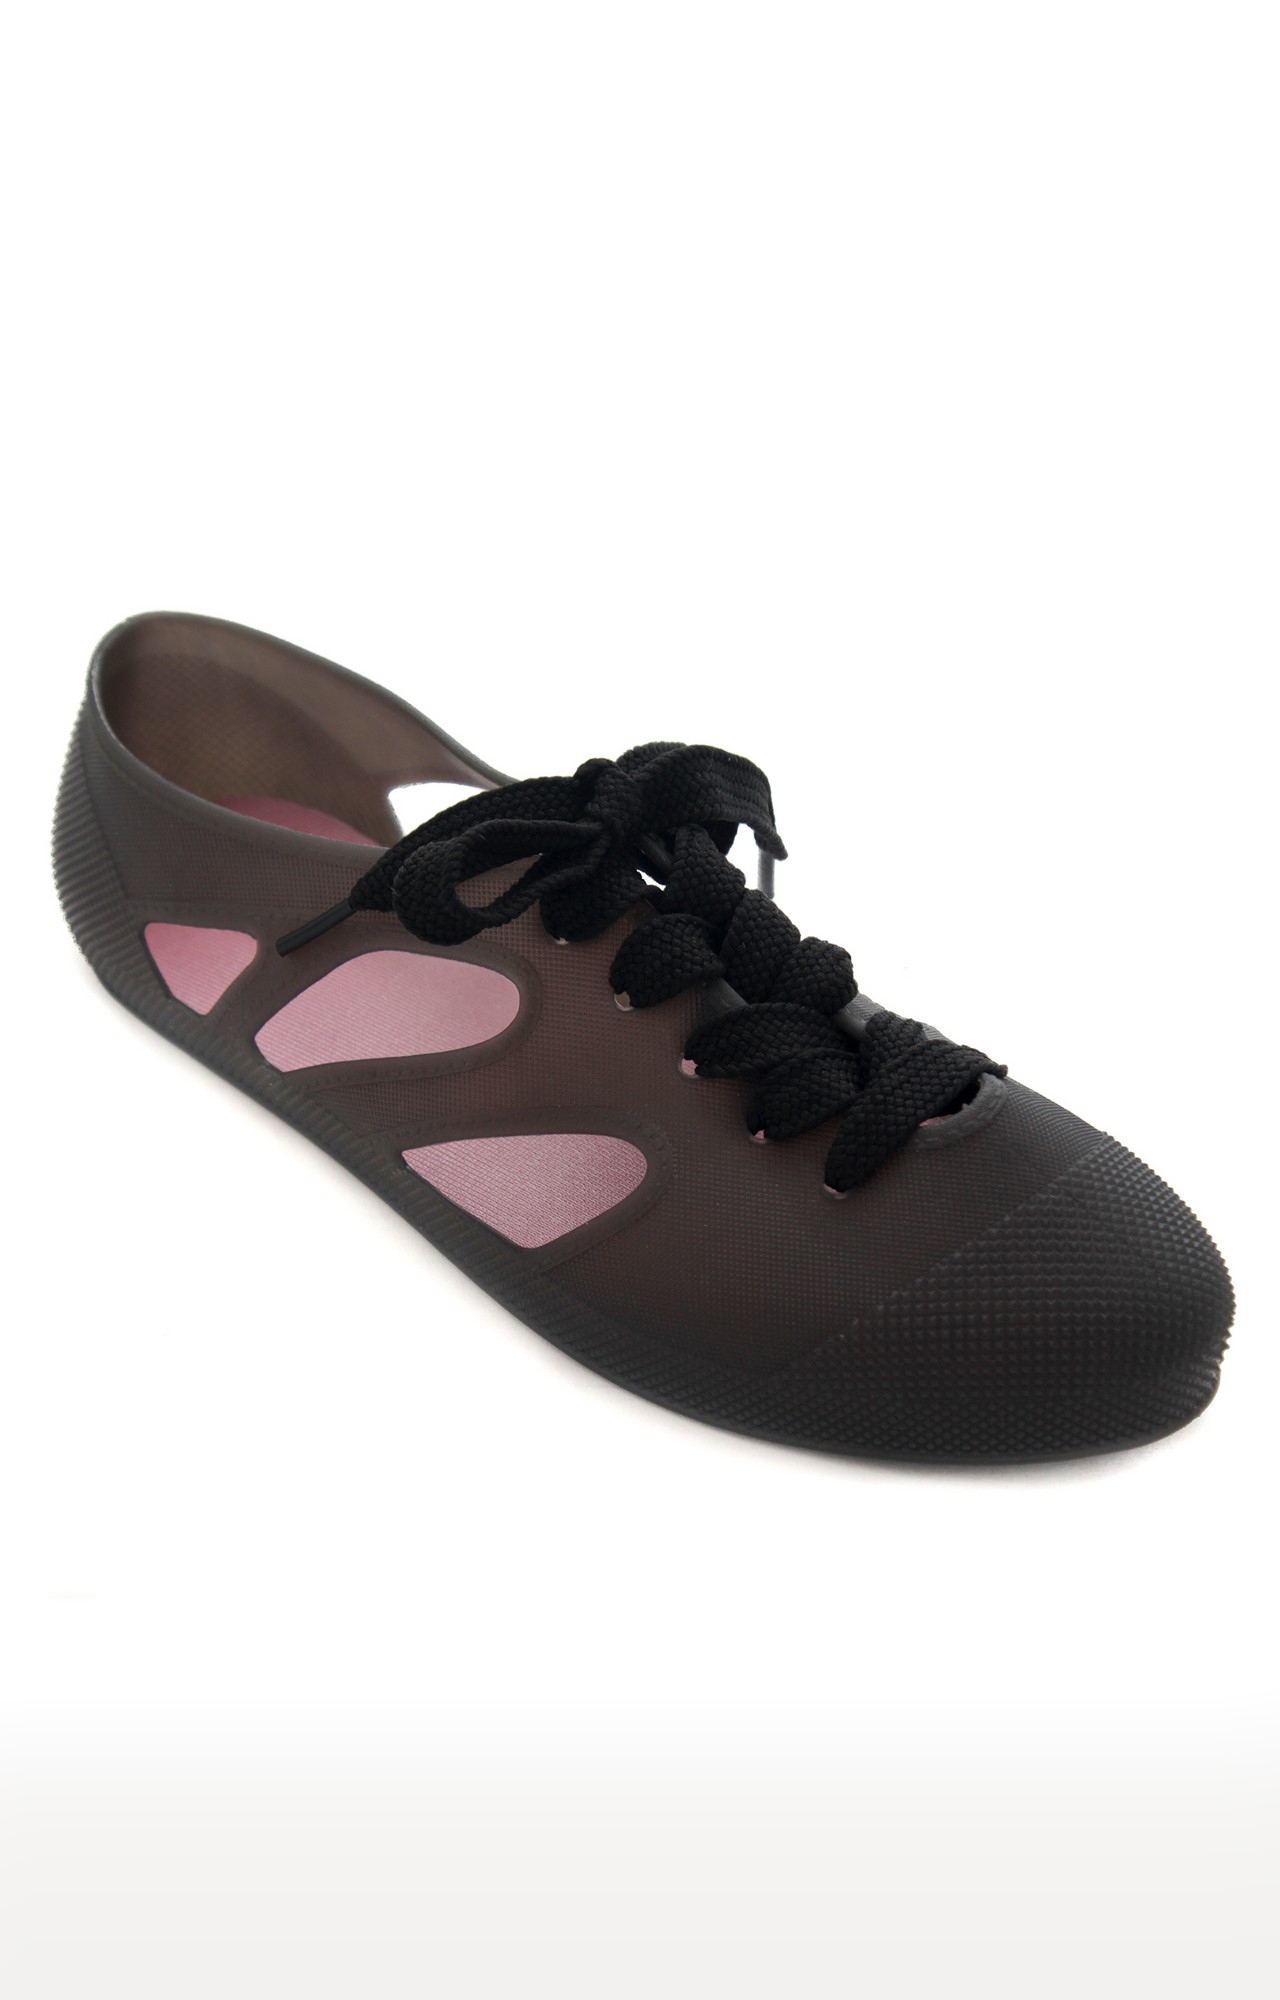 Trends & Trades Anti Slip Black Shoes For Women